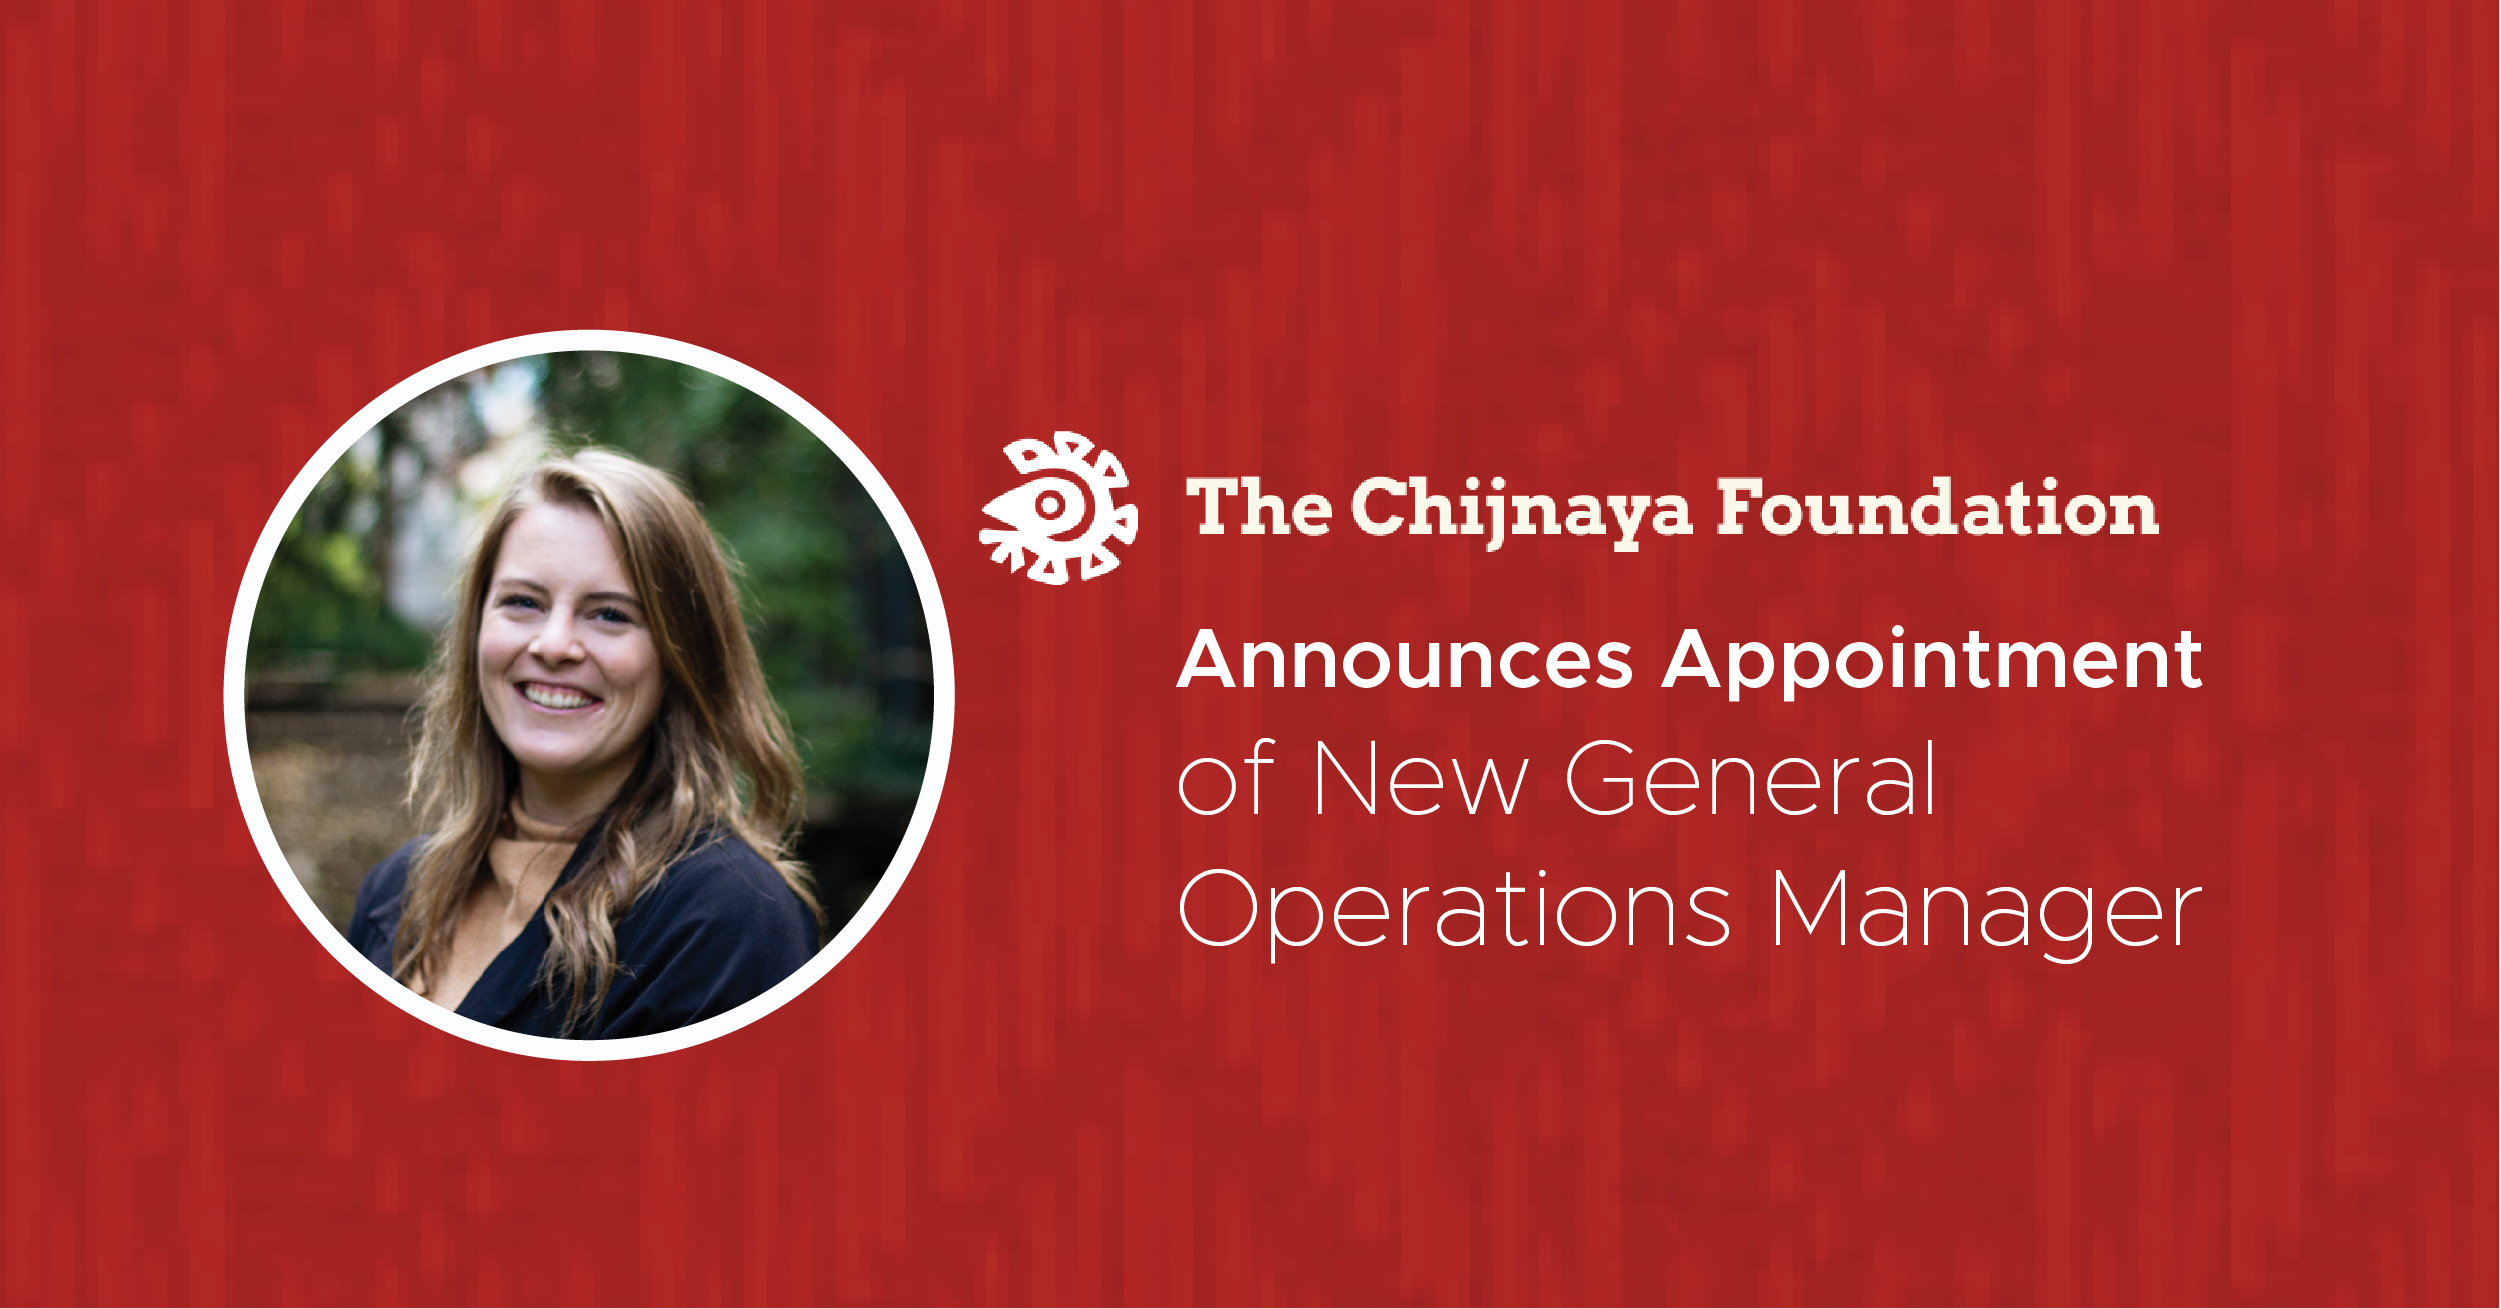 The Chijnaya Foundation Announces New General Operations Manager